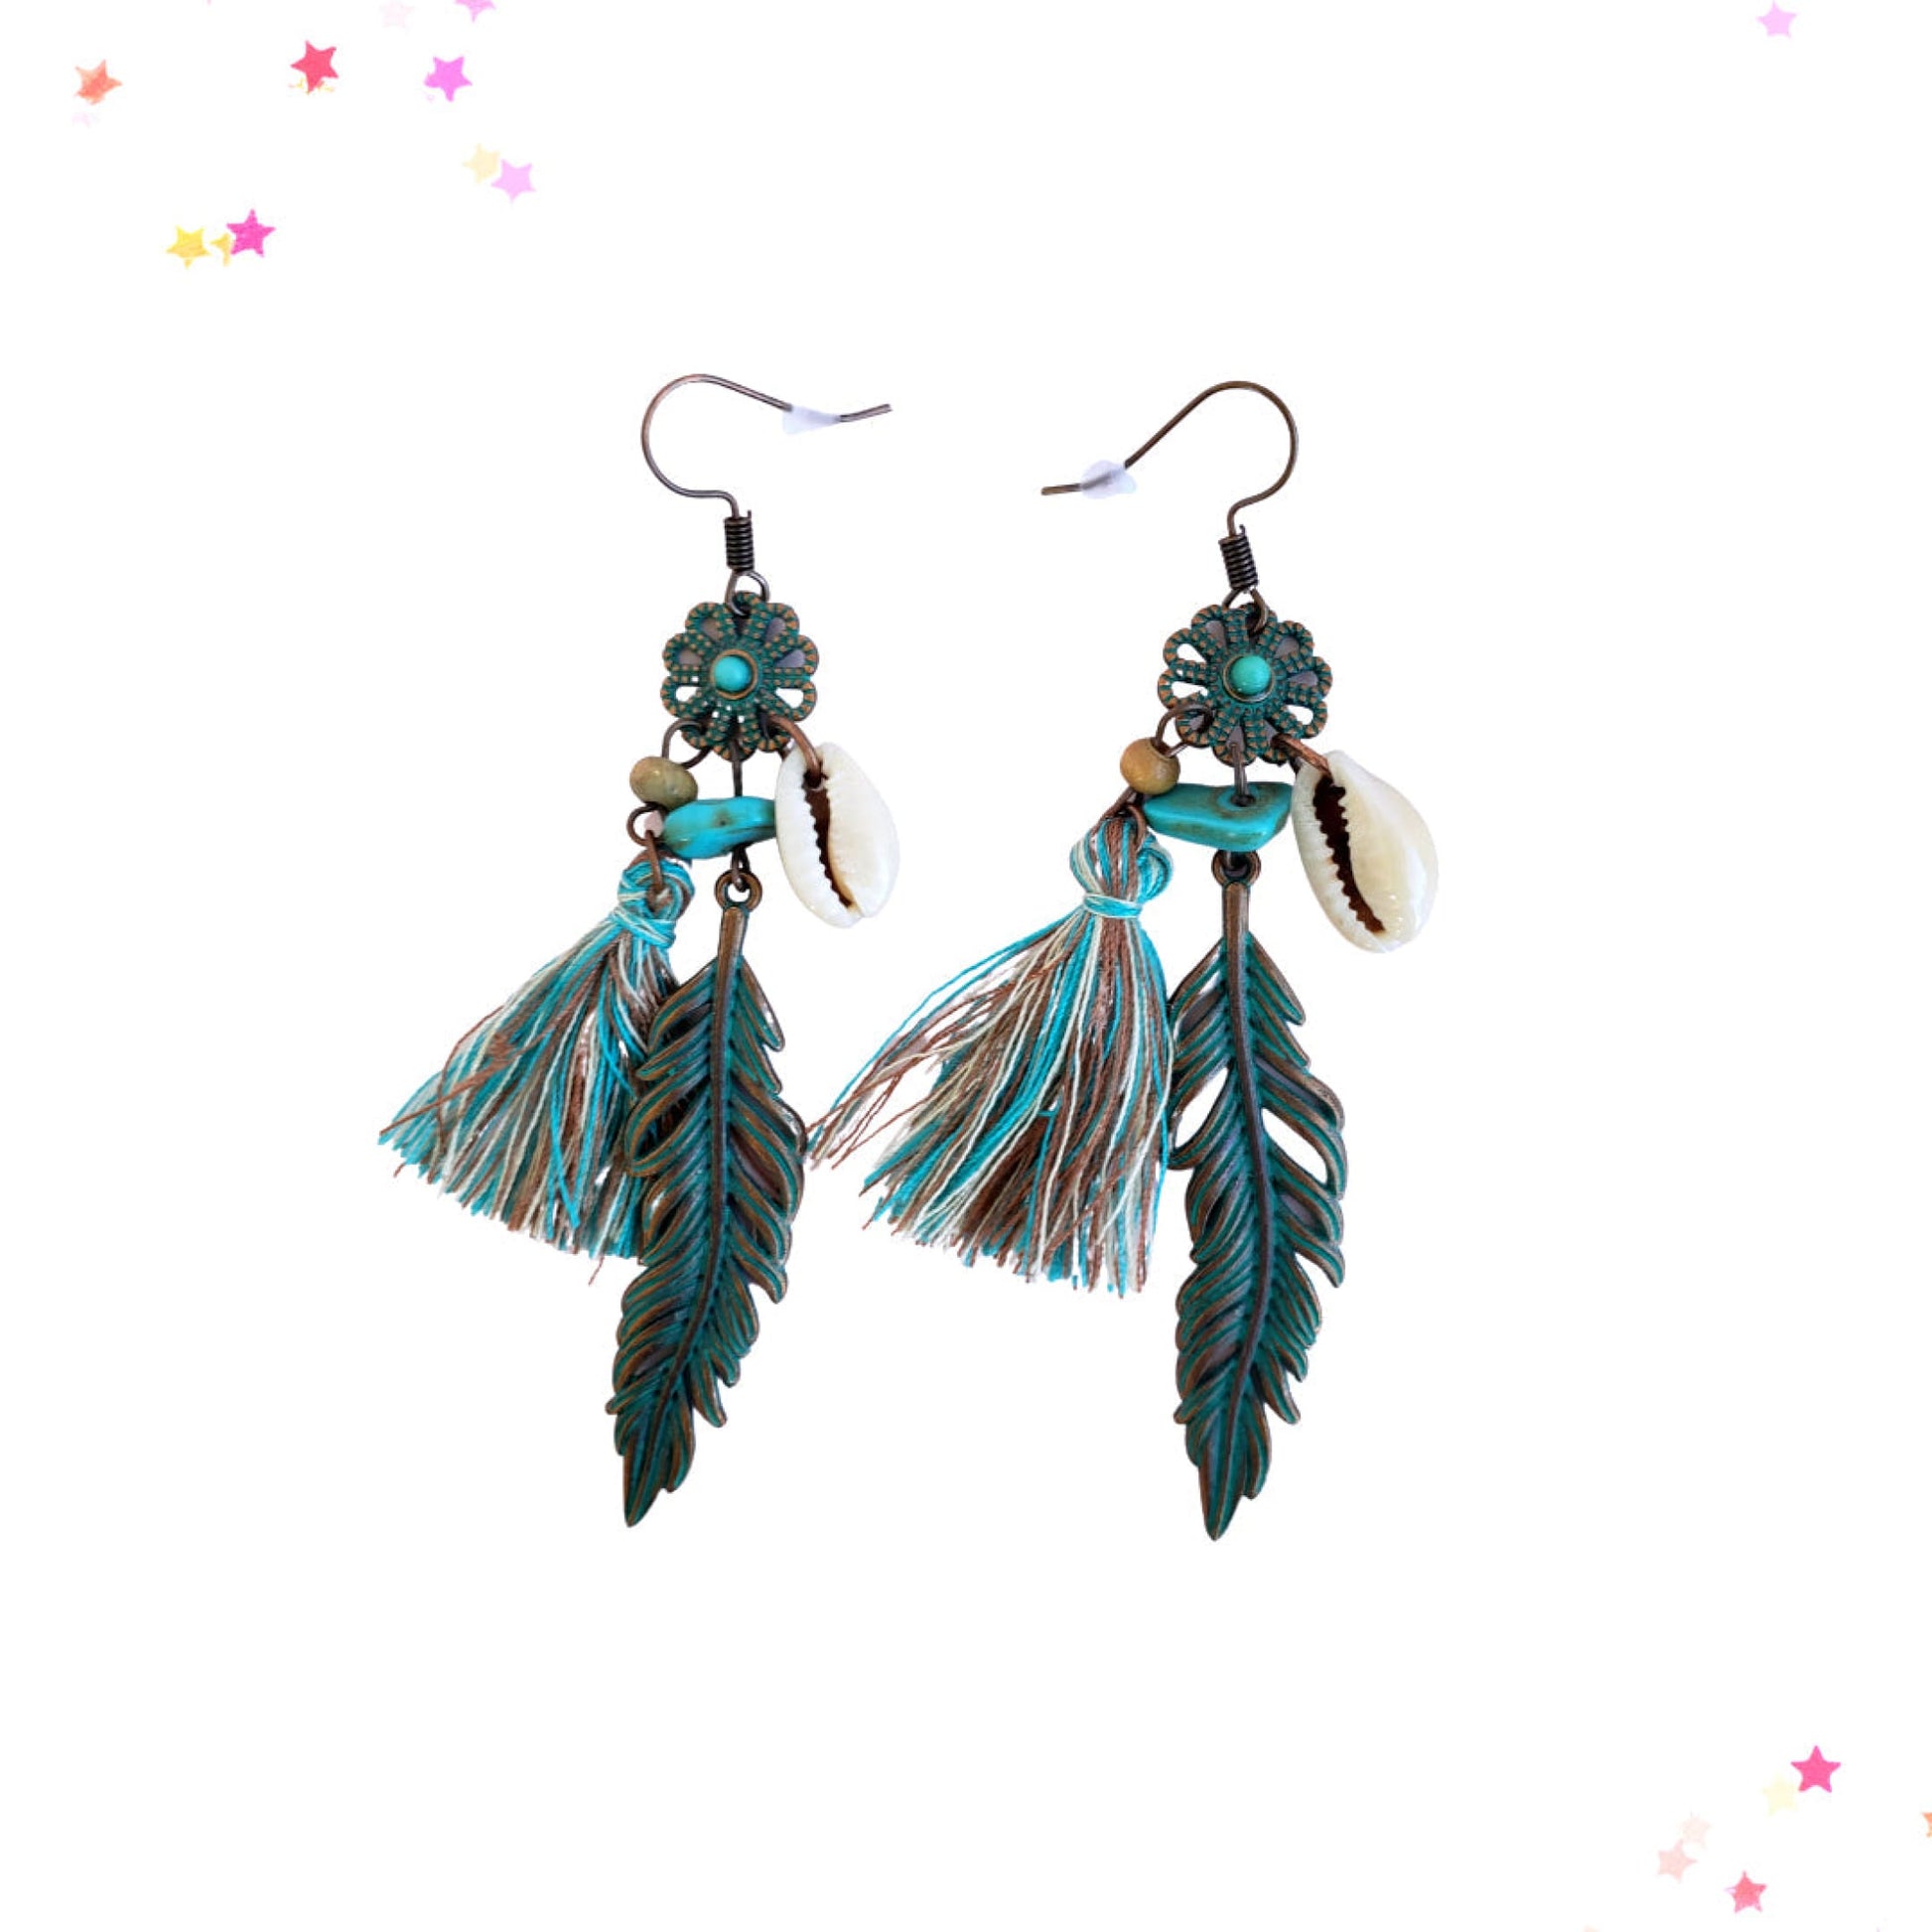 Feather and Seashell Tassel Earrings from Confetti Kitty, Only 7.99